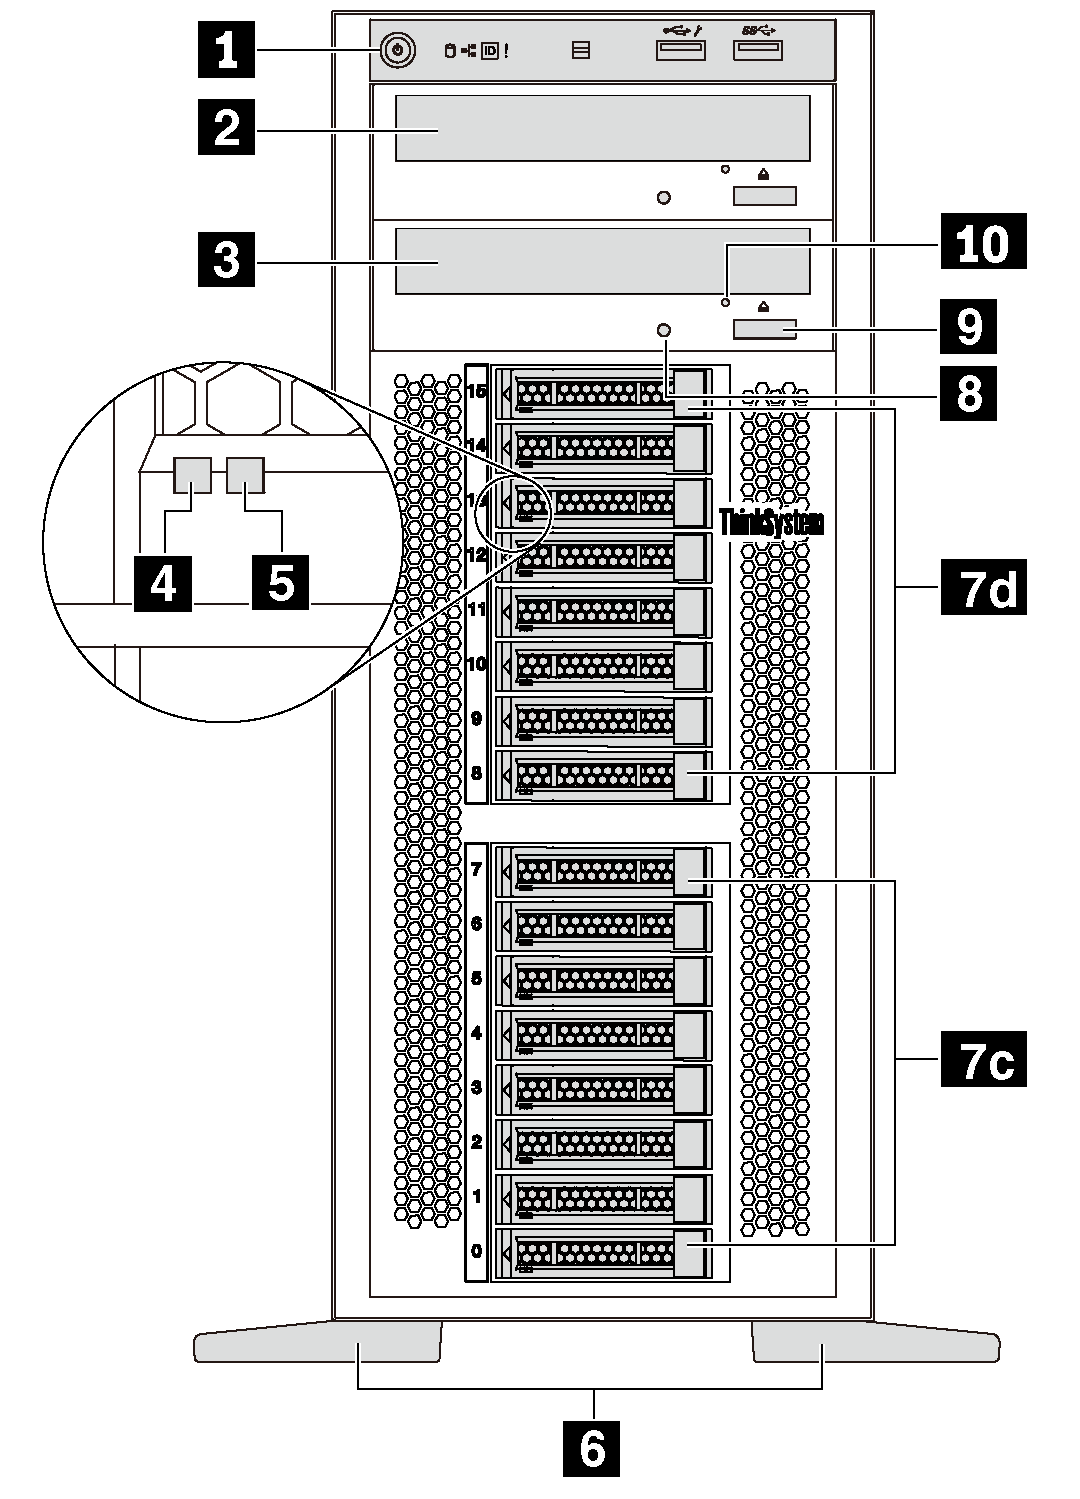 Front view of server models with two optical drive bays and sixteen 2.5-inch-drive bays